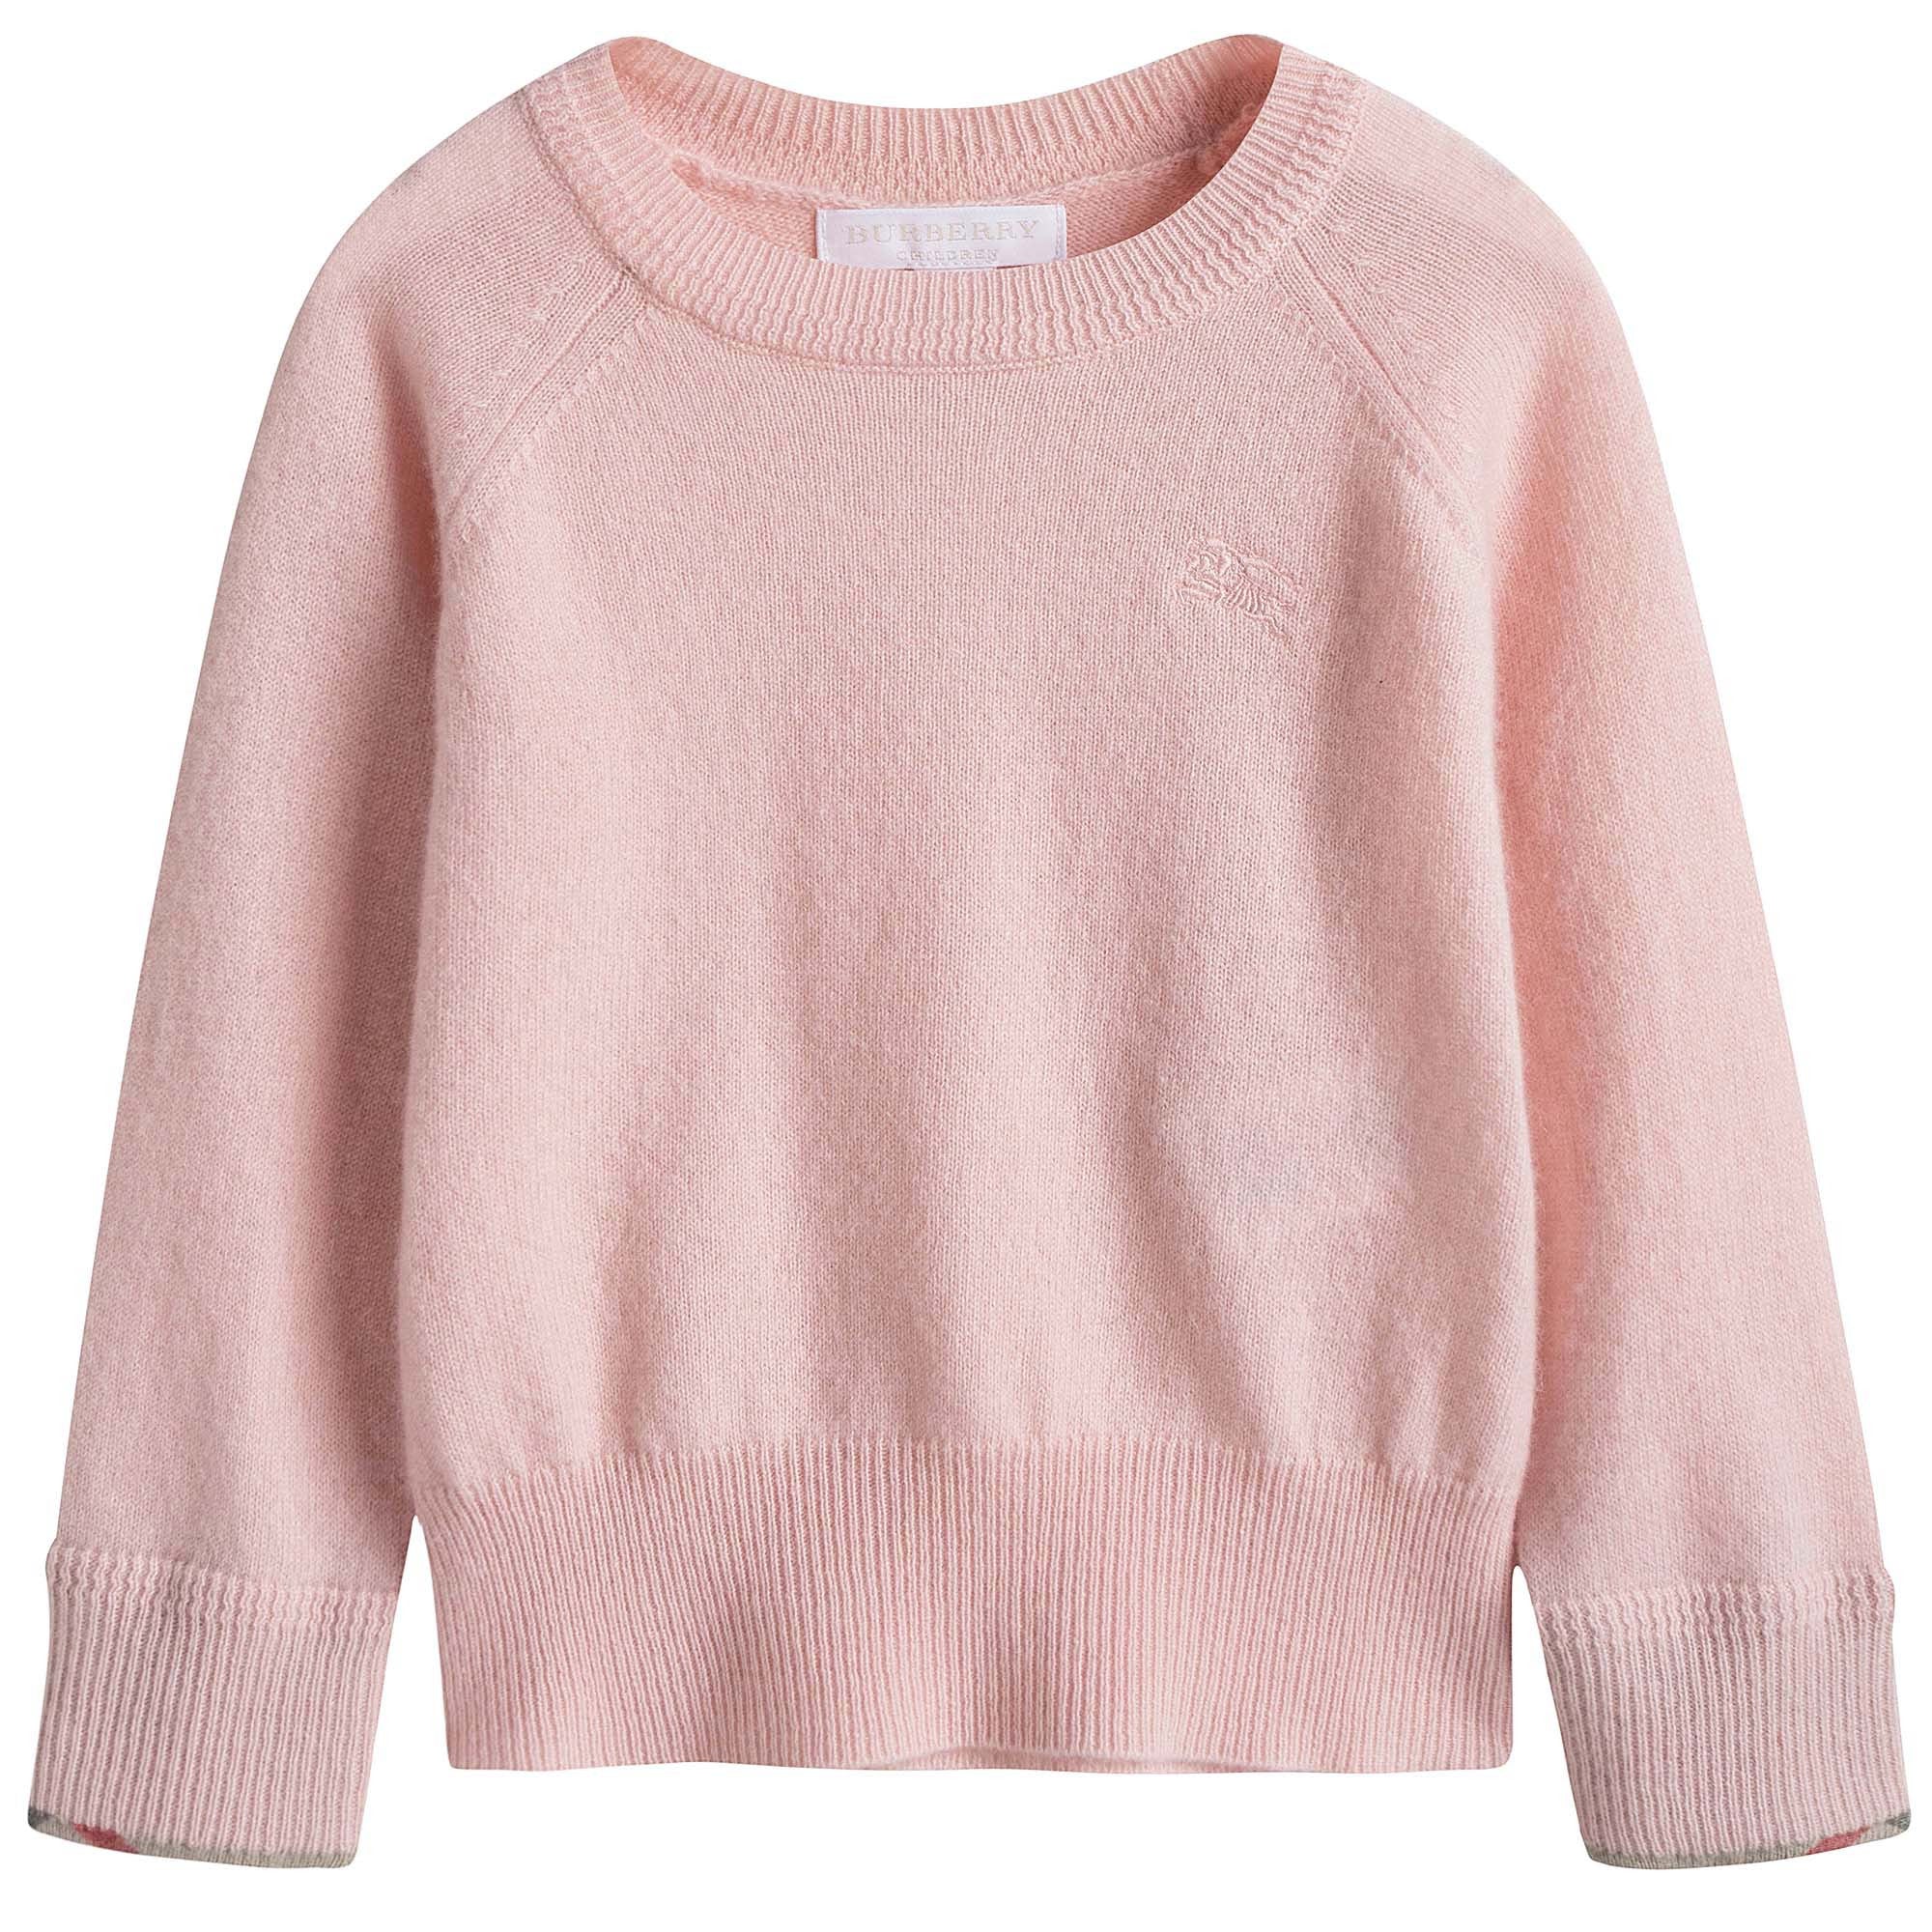 Girls Pink Cashmere Knitted Sweater